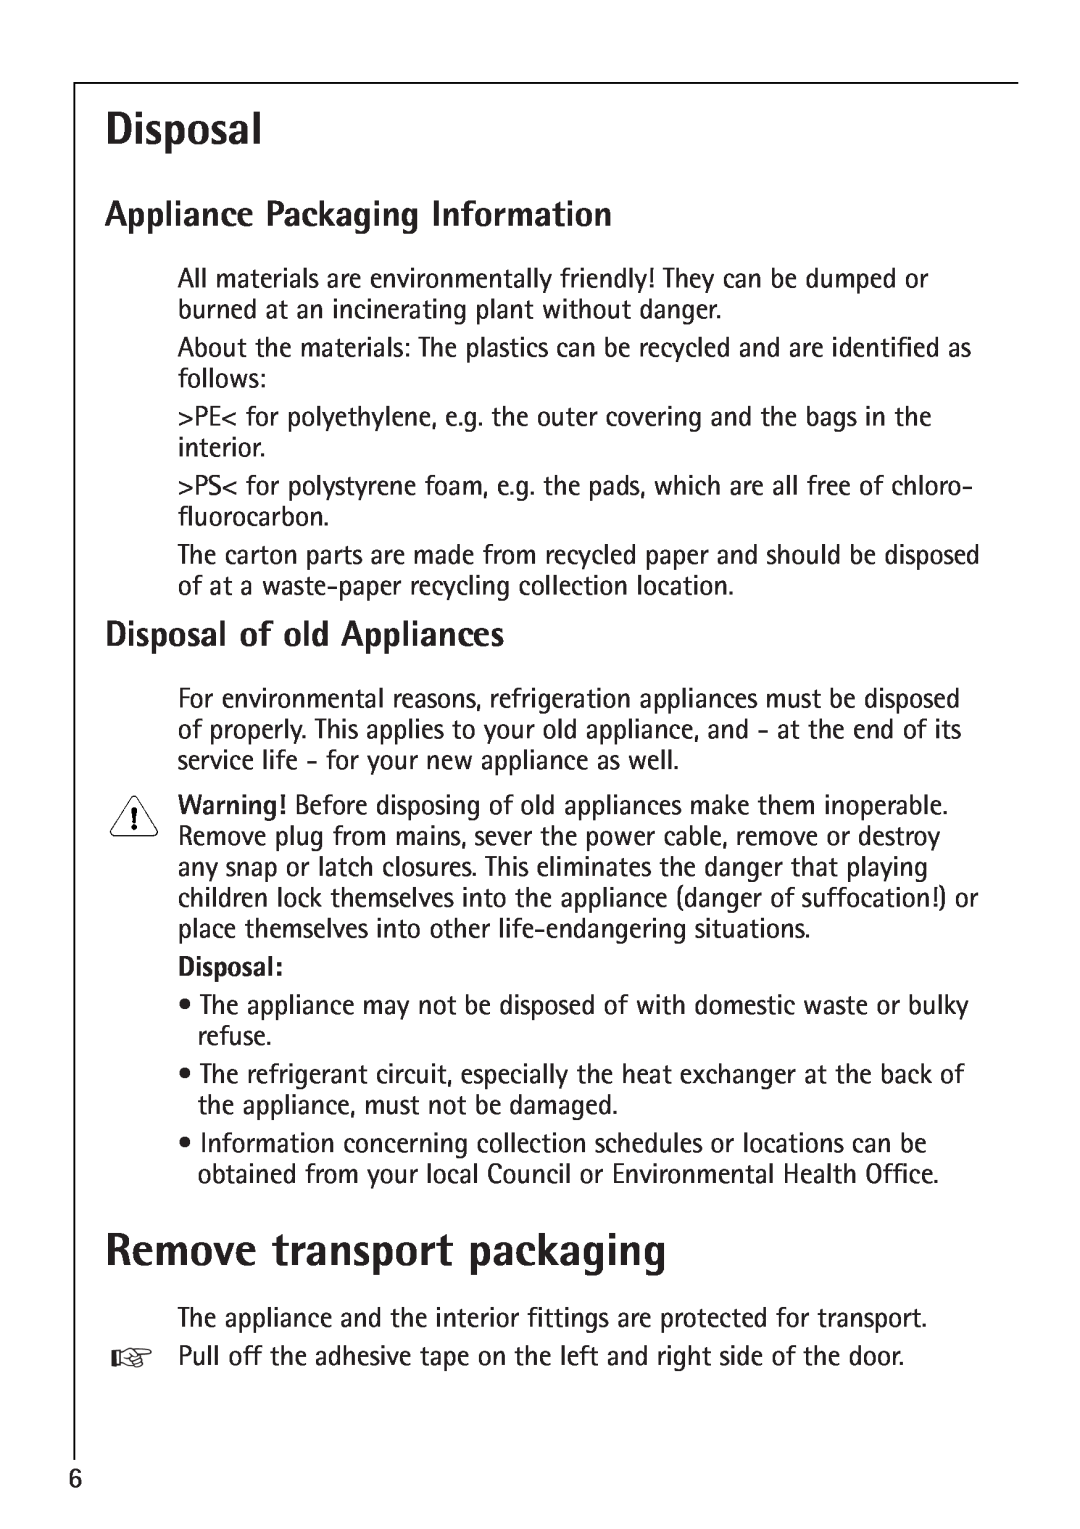 Electrolux 1254-6 iU Remove transport packaging, Appliance Packaging Information, Disposal of old Appliances 